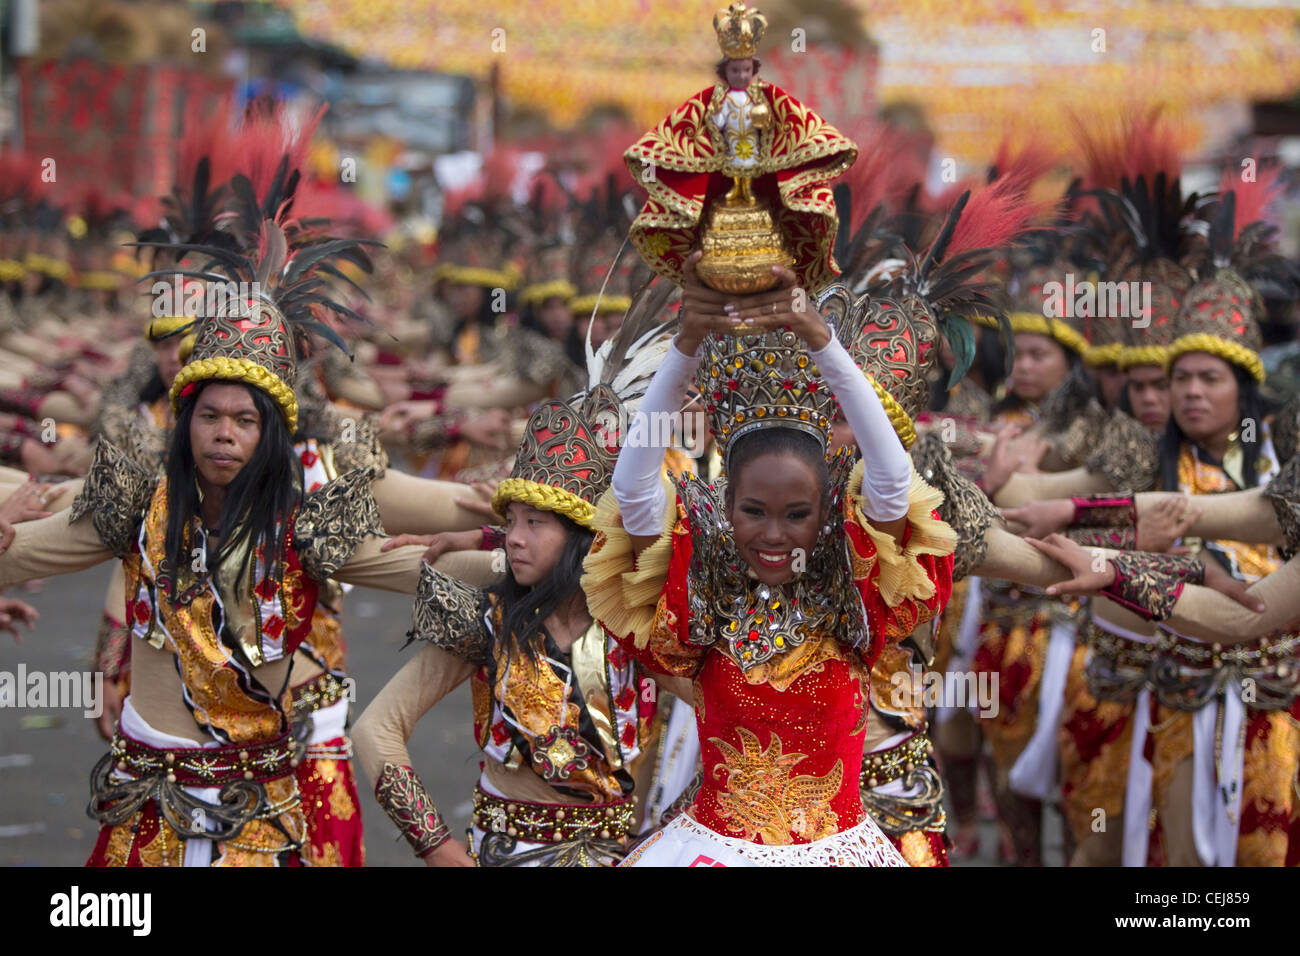 Sinulog Festival Queen 2012 performs with her dance group in Grande Parade Stock Photo